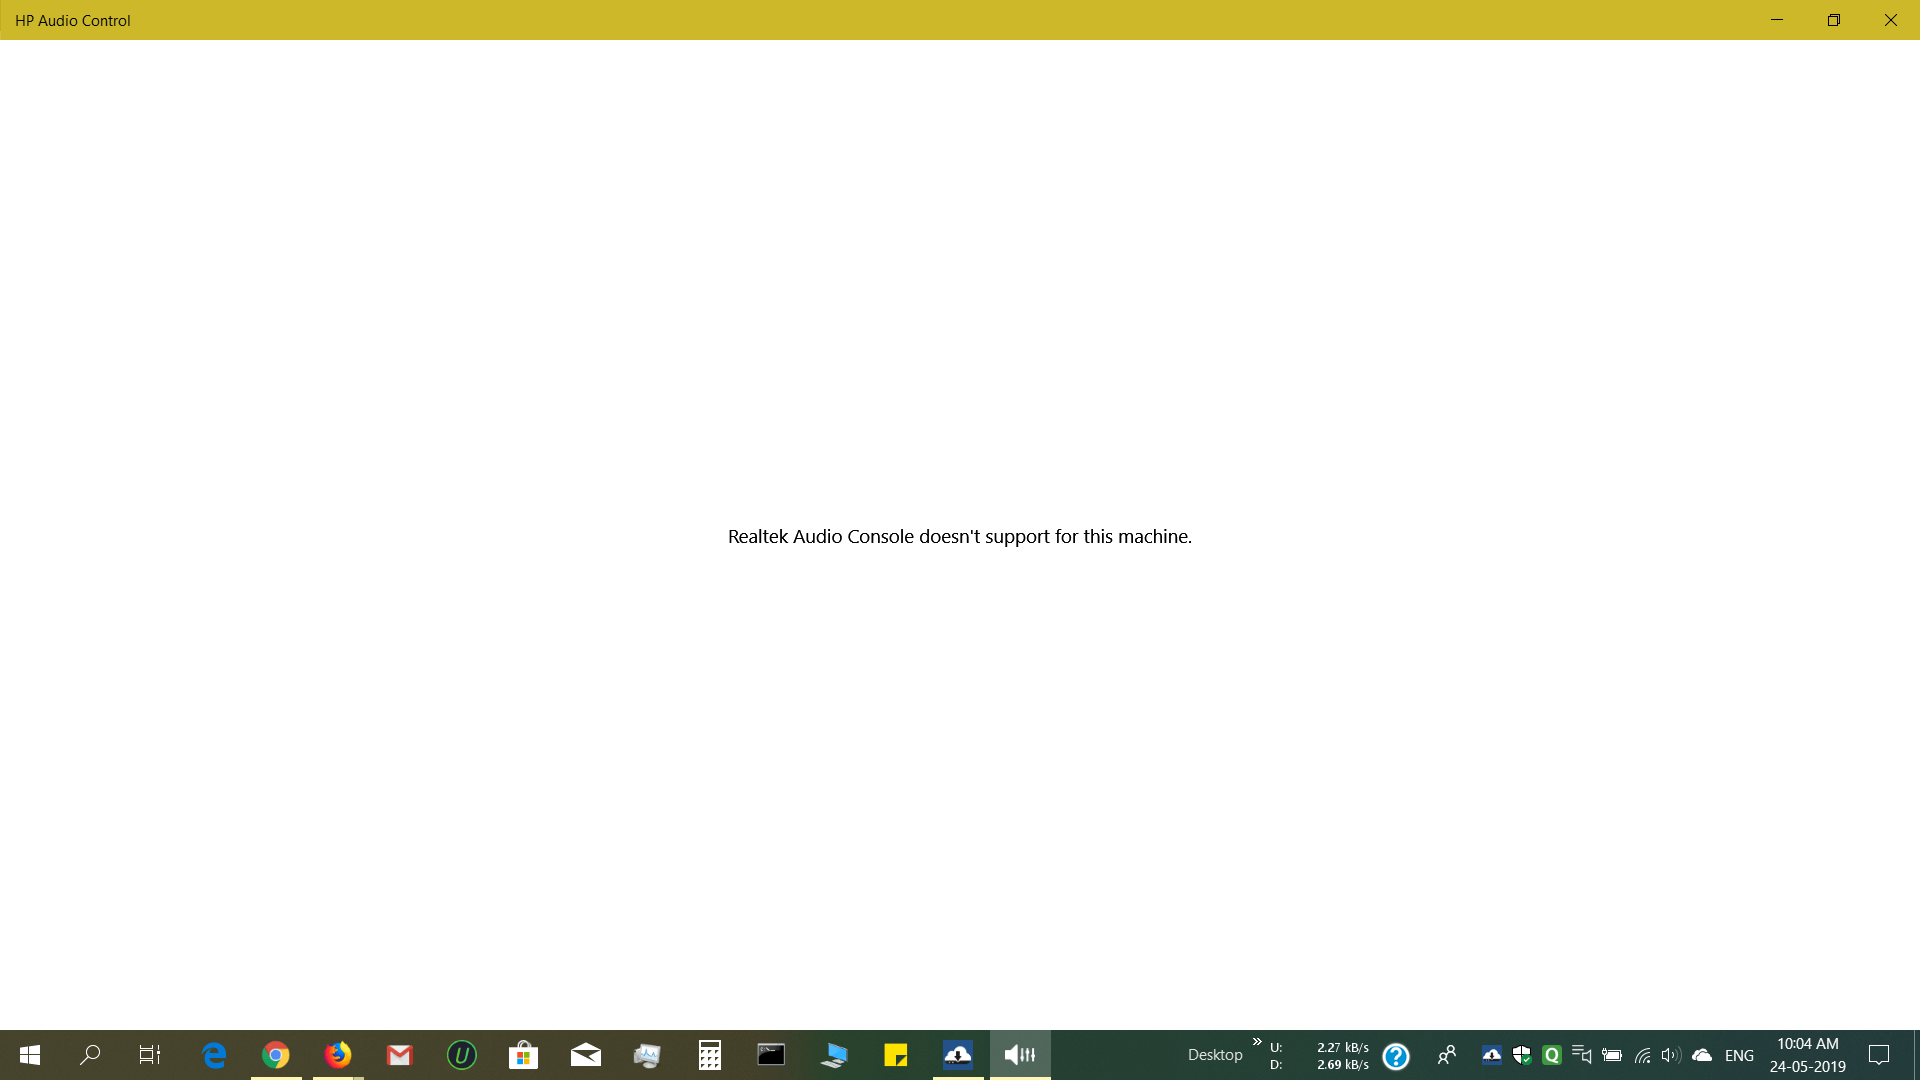 hp audio control doesn't work on windows 10 v1903